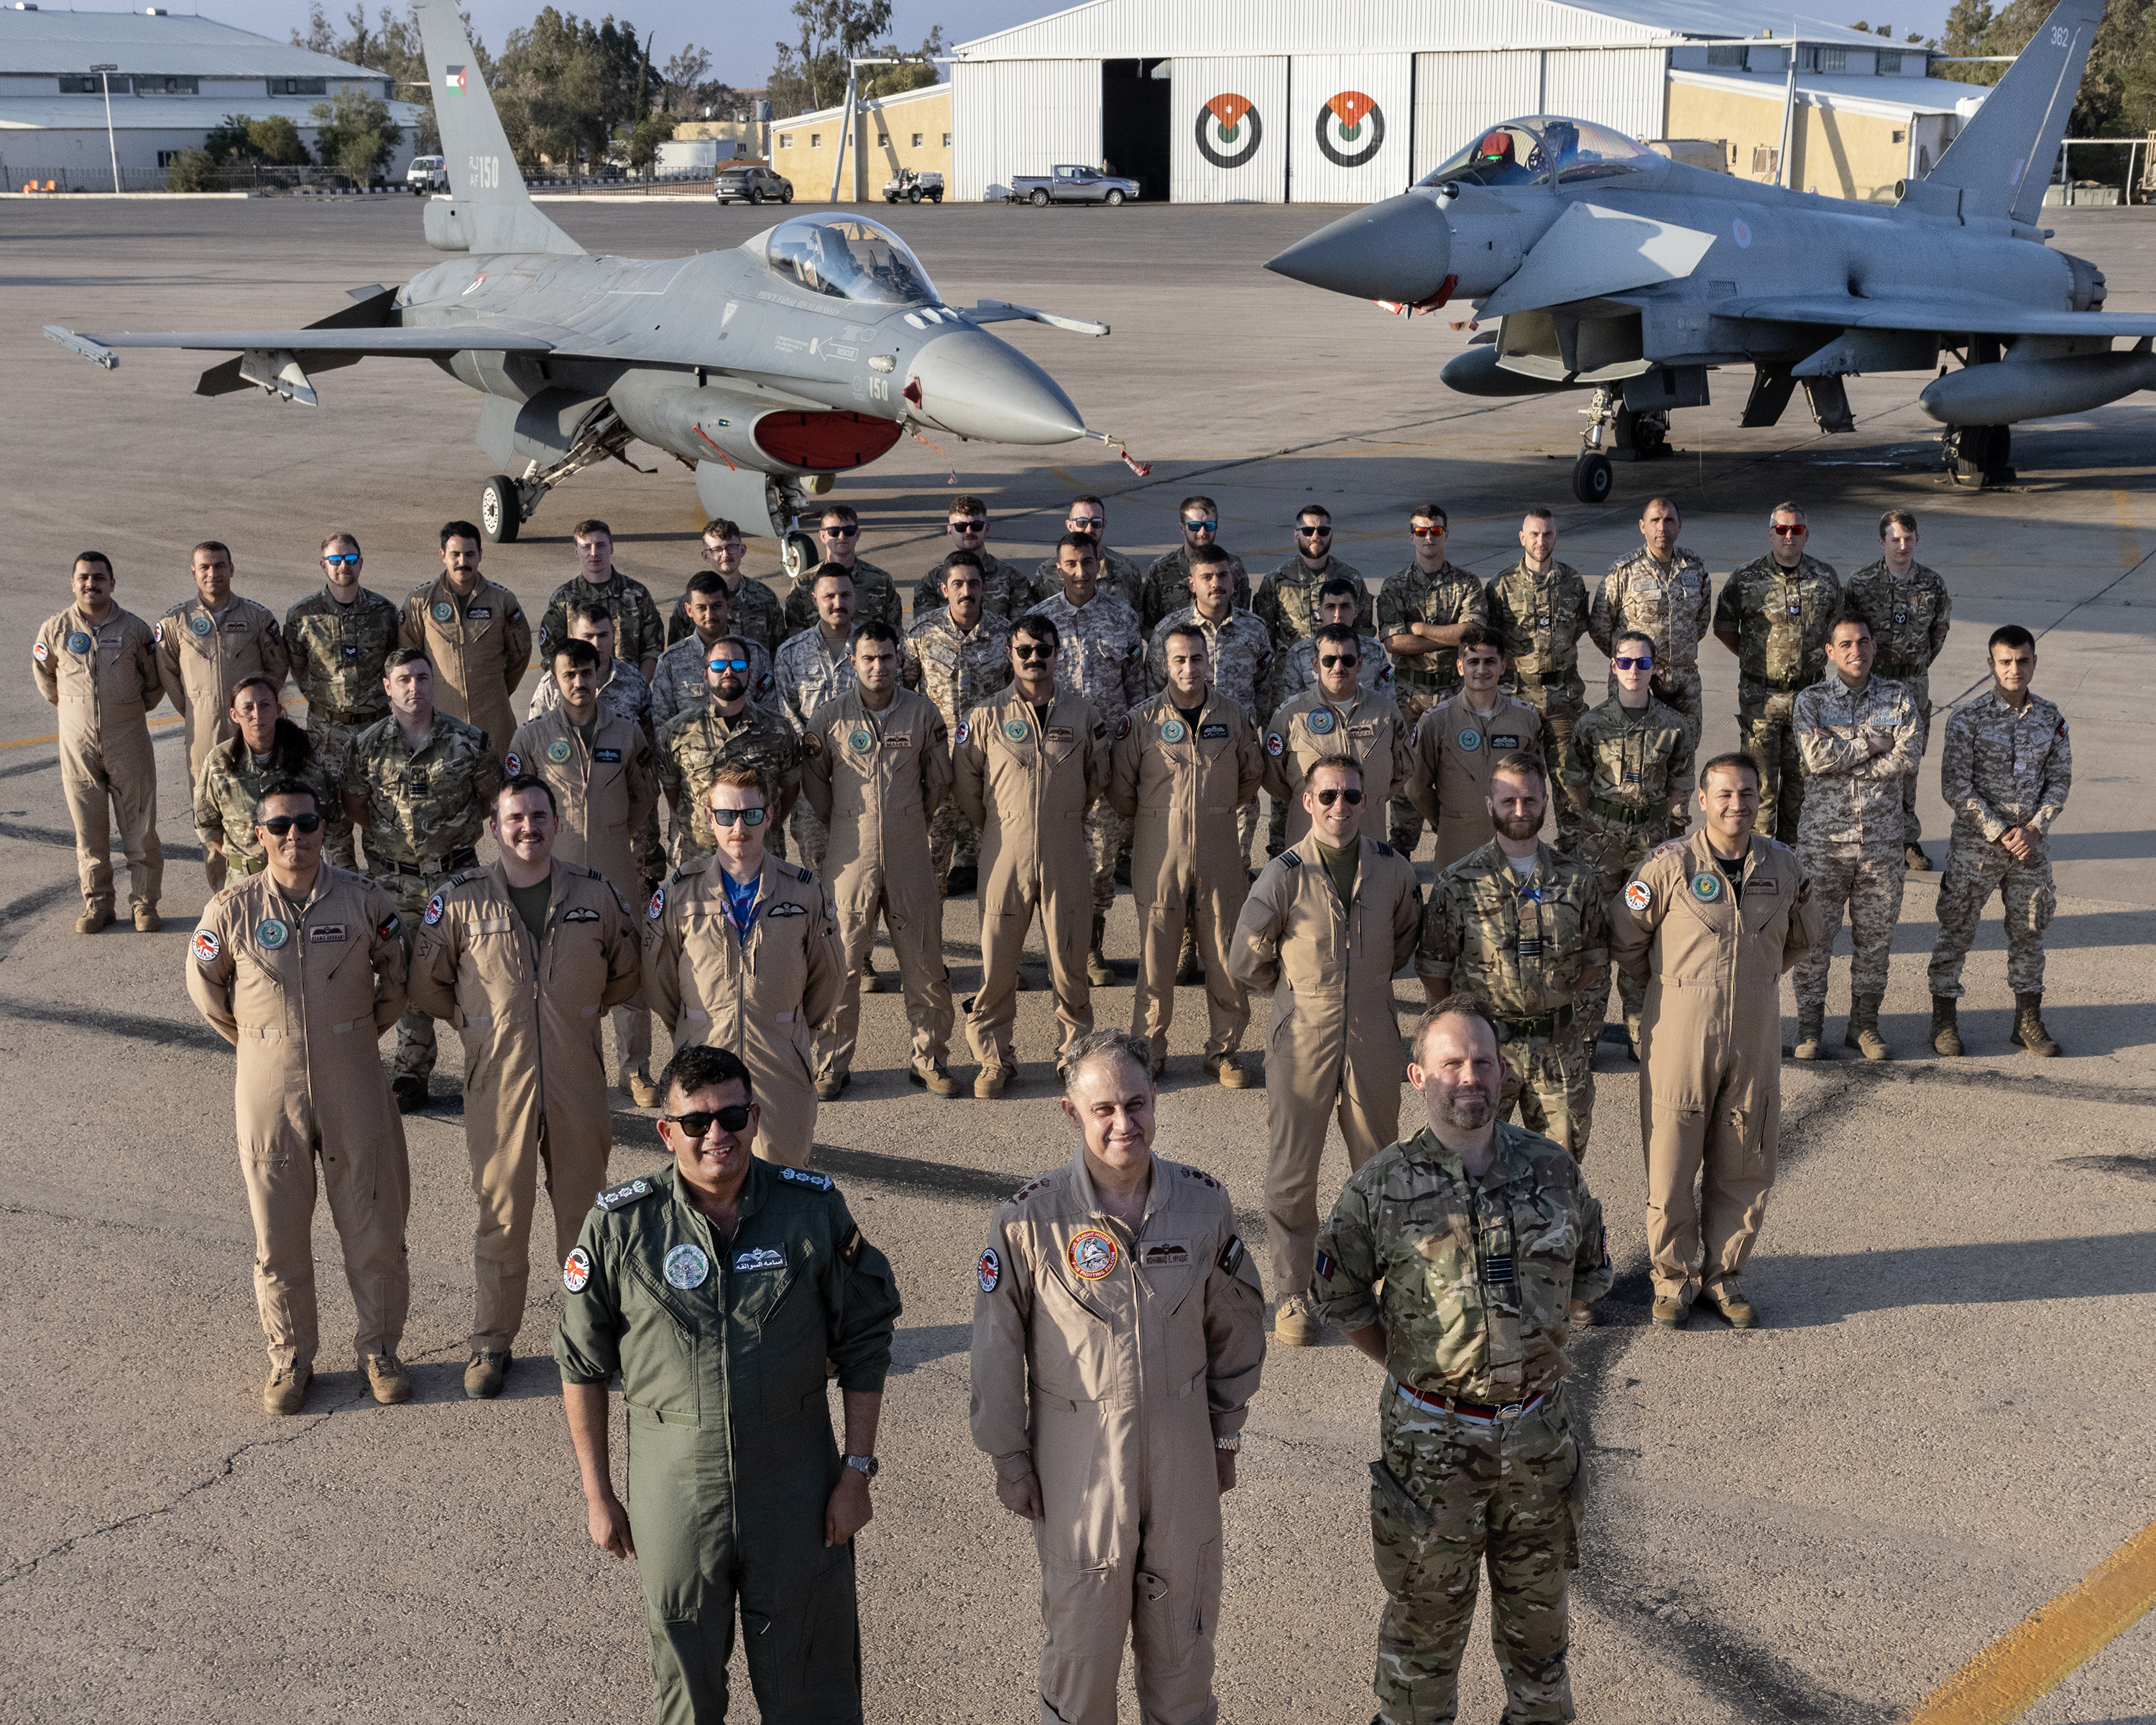 Image shows RAF Typhoon Squadron standing in a triangle formation by two Typhoons on the airfield.